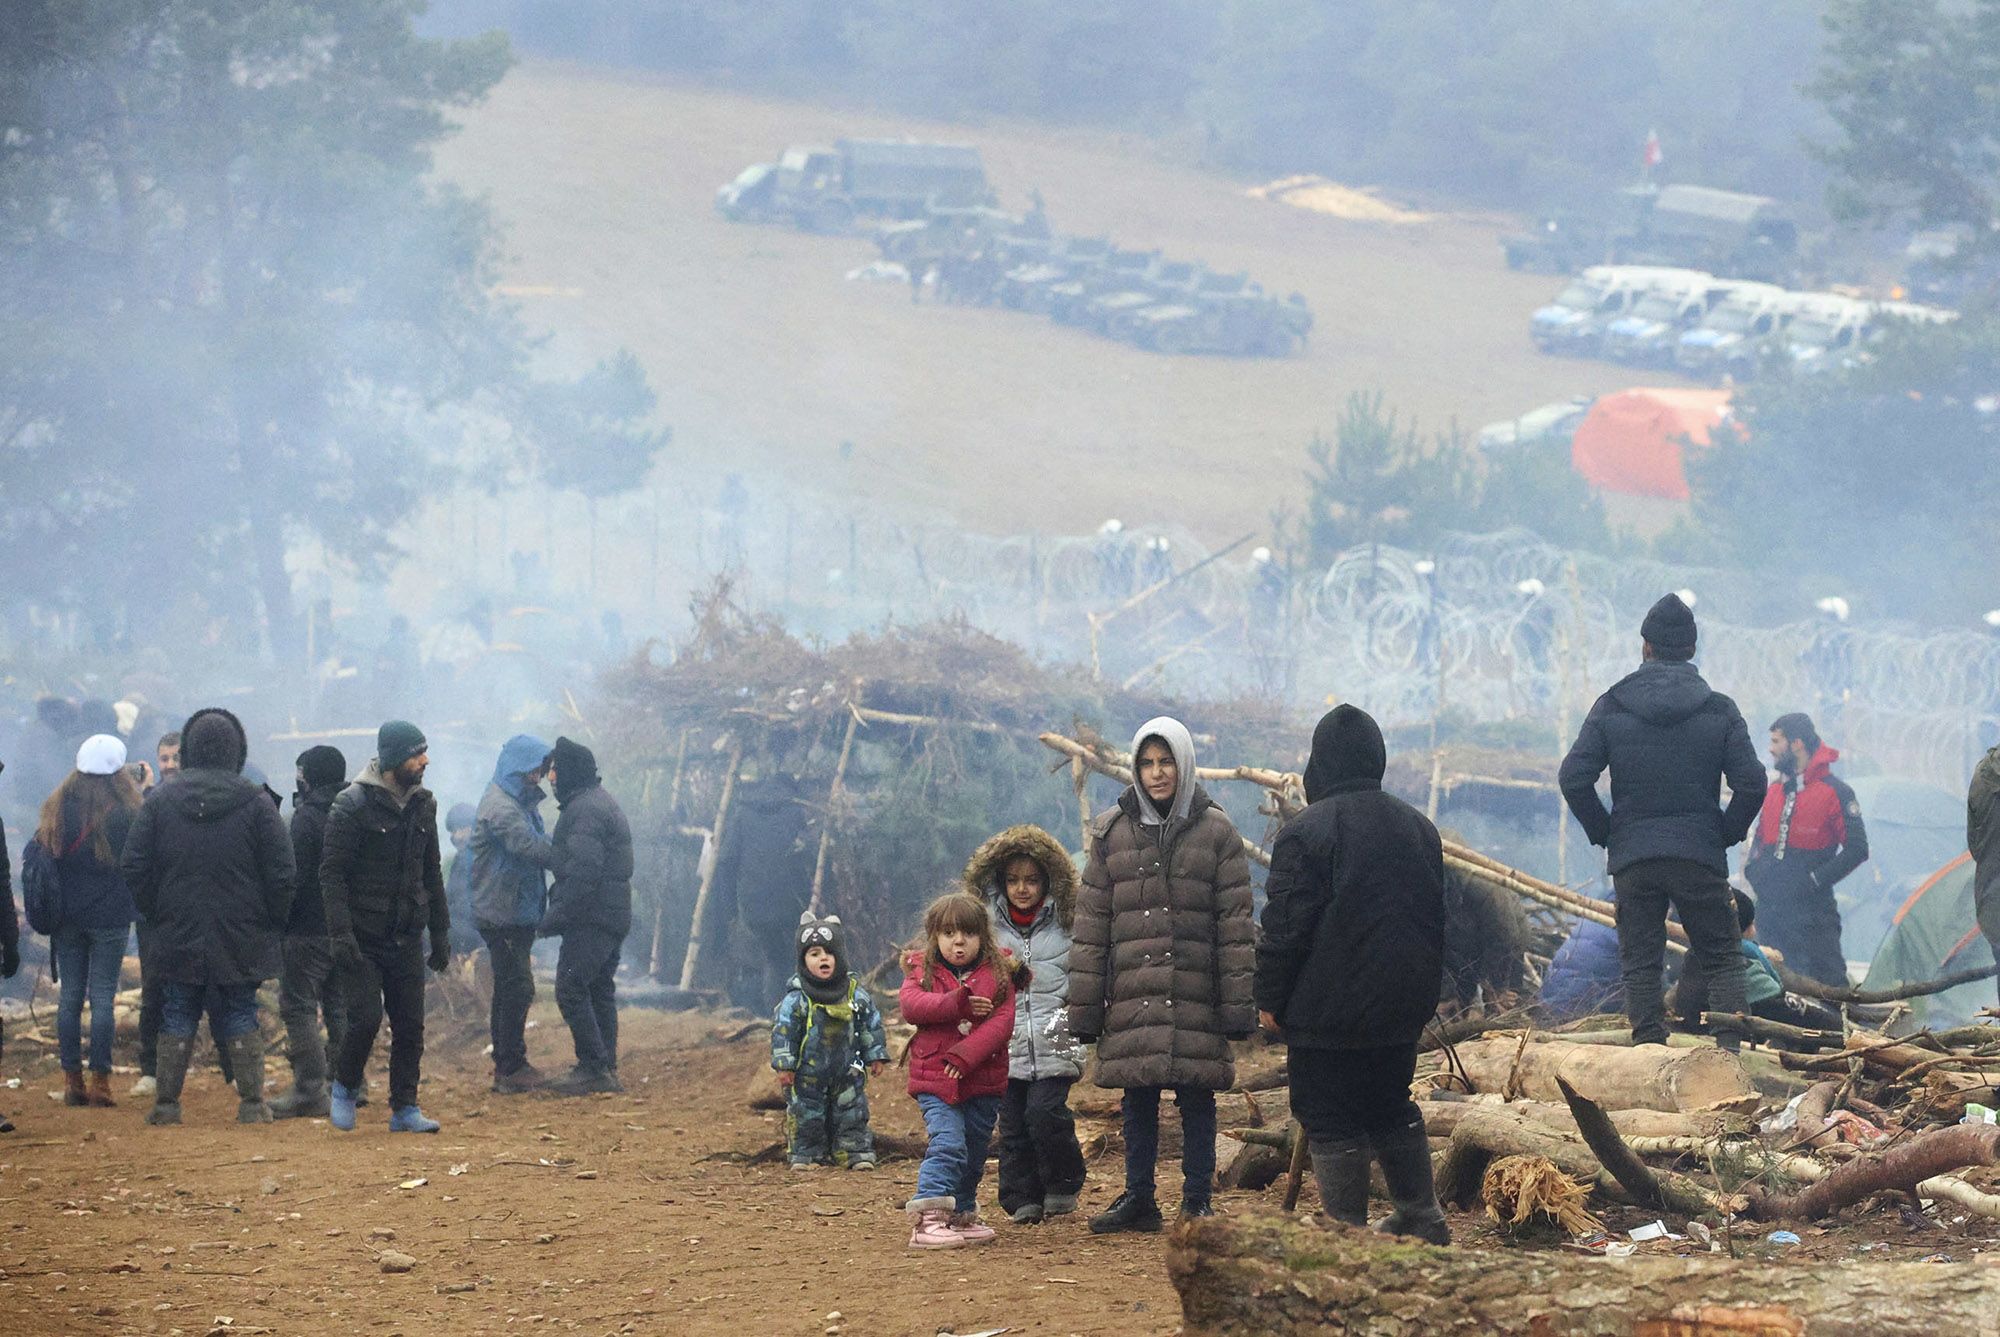 A group of migrants are seen in a camp near the Belarusian-Polish border in the Grodno region on November 13, 2021. (Leonid Shcheglov/AFP/Getty Images)